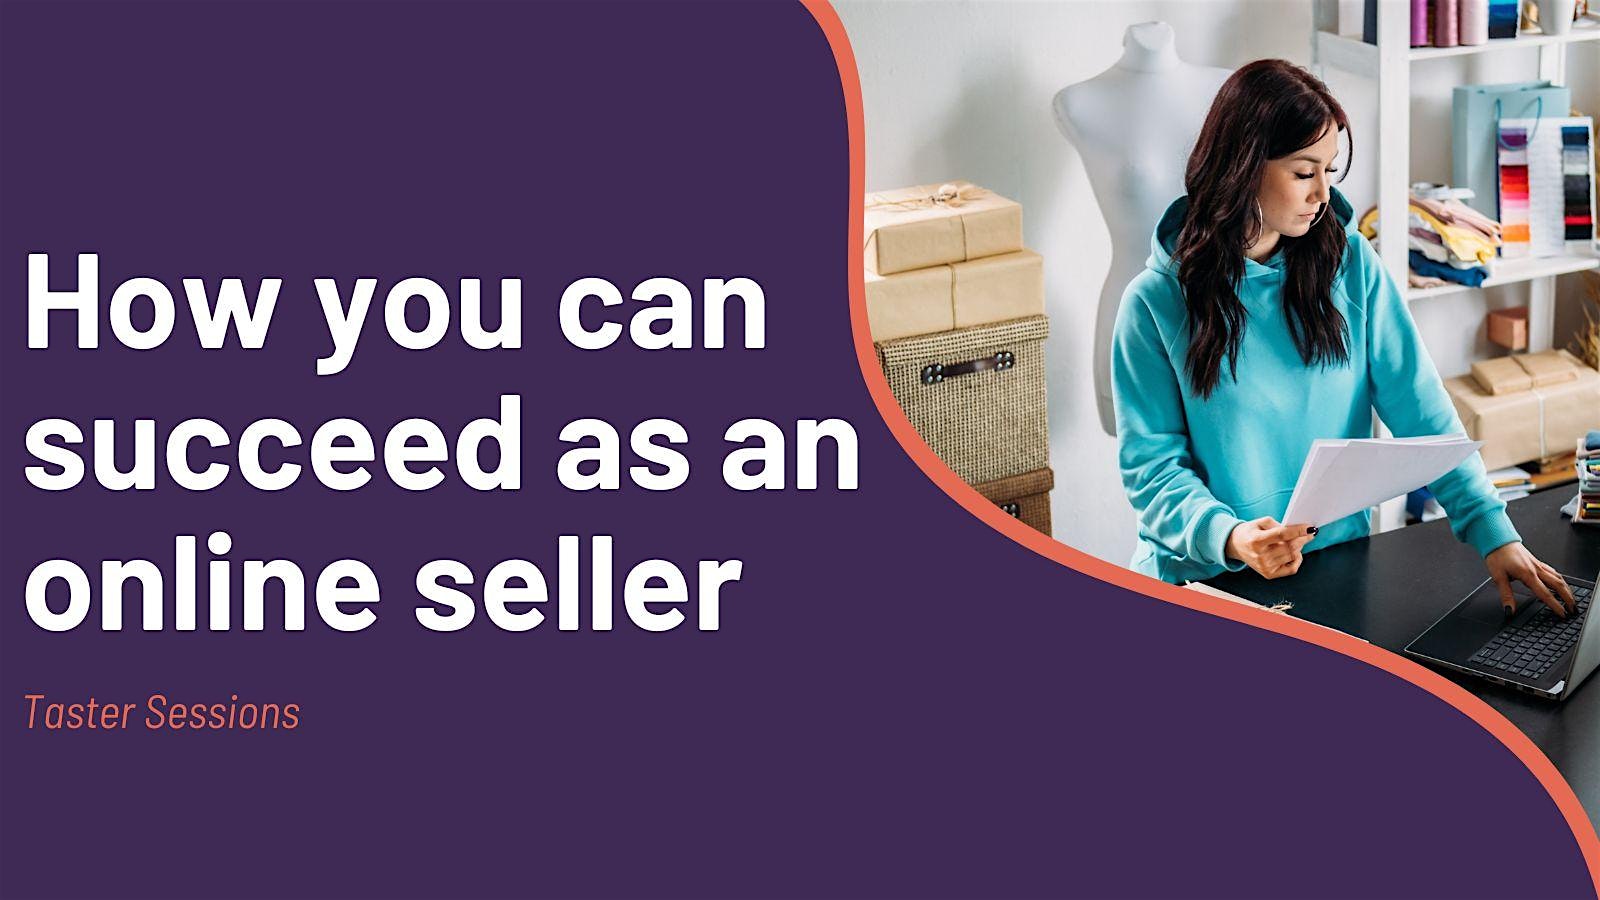 Taster Sessions: How you can succeed as an online seller (Kirkcudbright) image